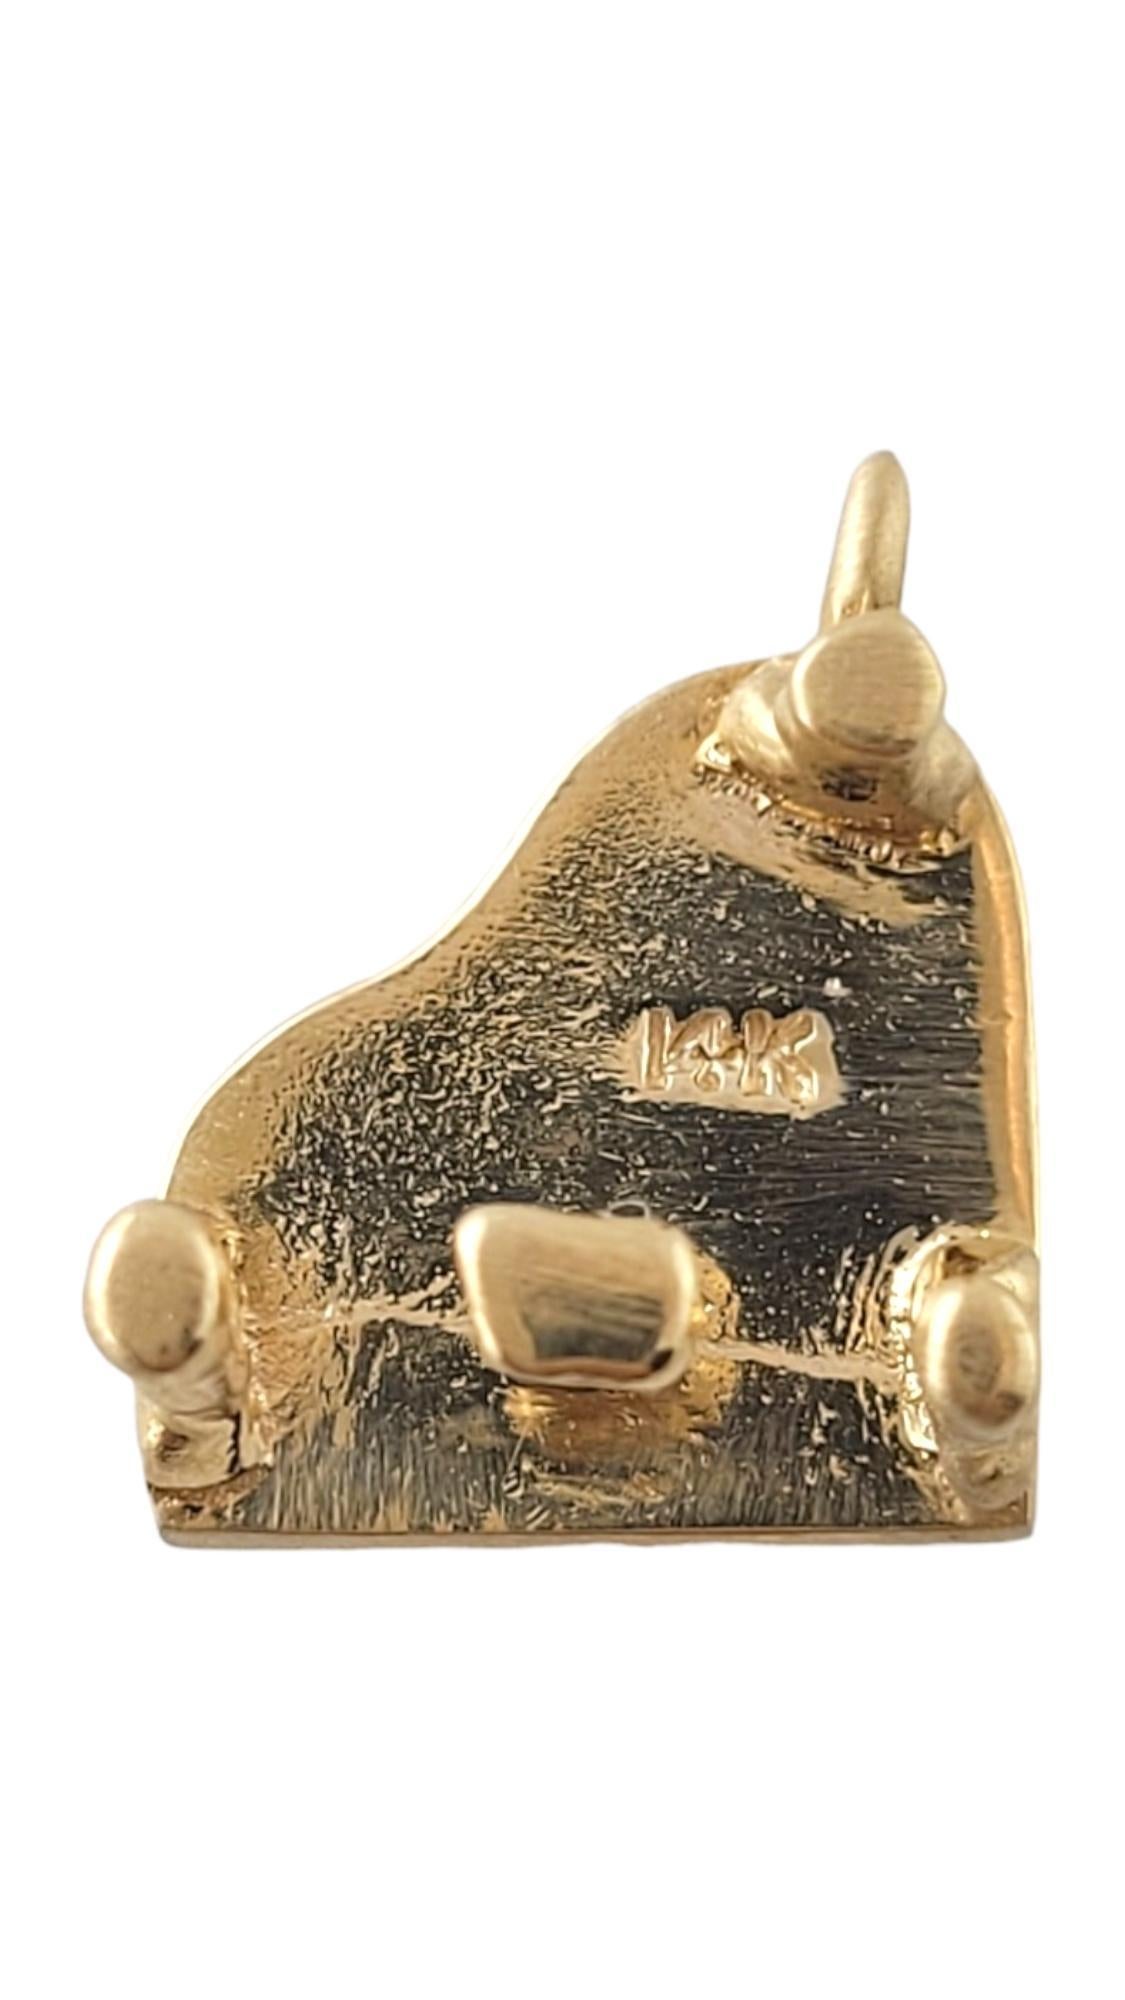 14K Yellow Gold Grand Piano Charm #16896 For Sale 2